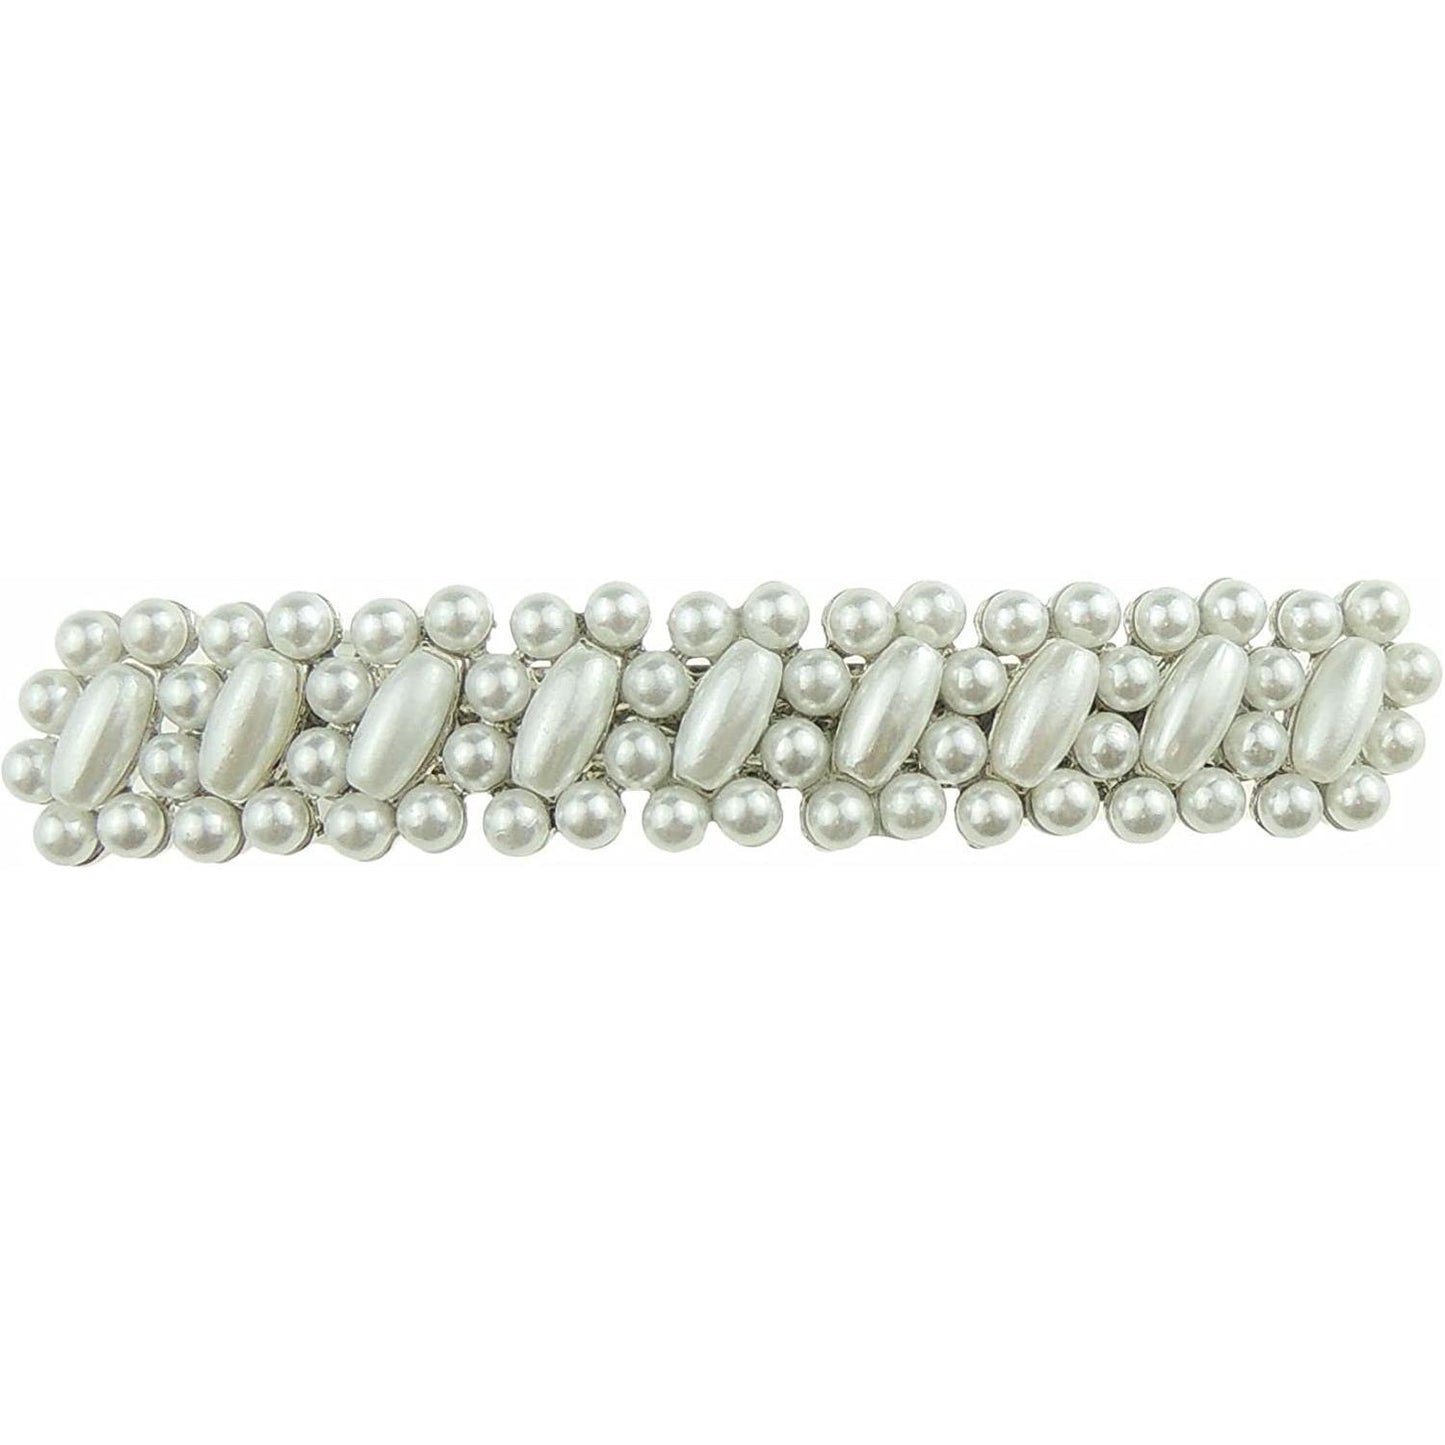 Womens Girls Wedding Bridal Party Evening Ponytail Fine Hair Accessories Occasion Barrette Hairpin Grip French Metal Spring Clip Silver Tone Narrow Long Ivory Faux Pearl